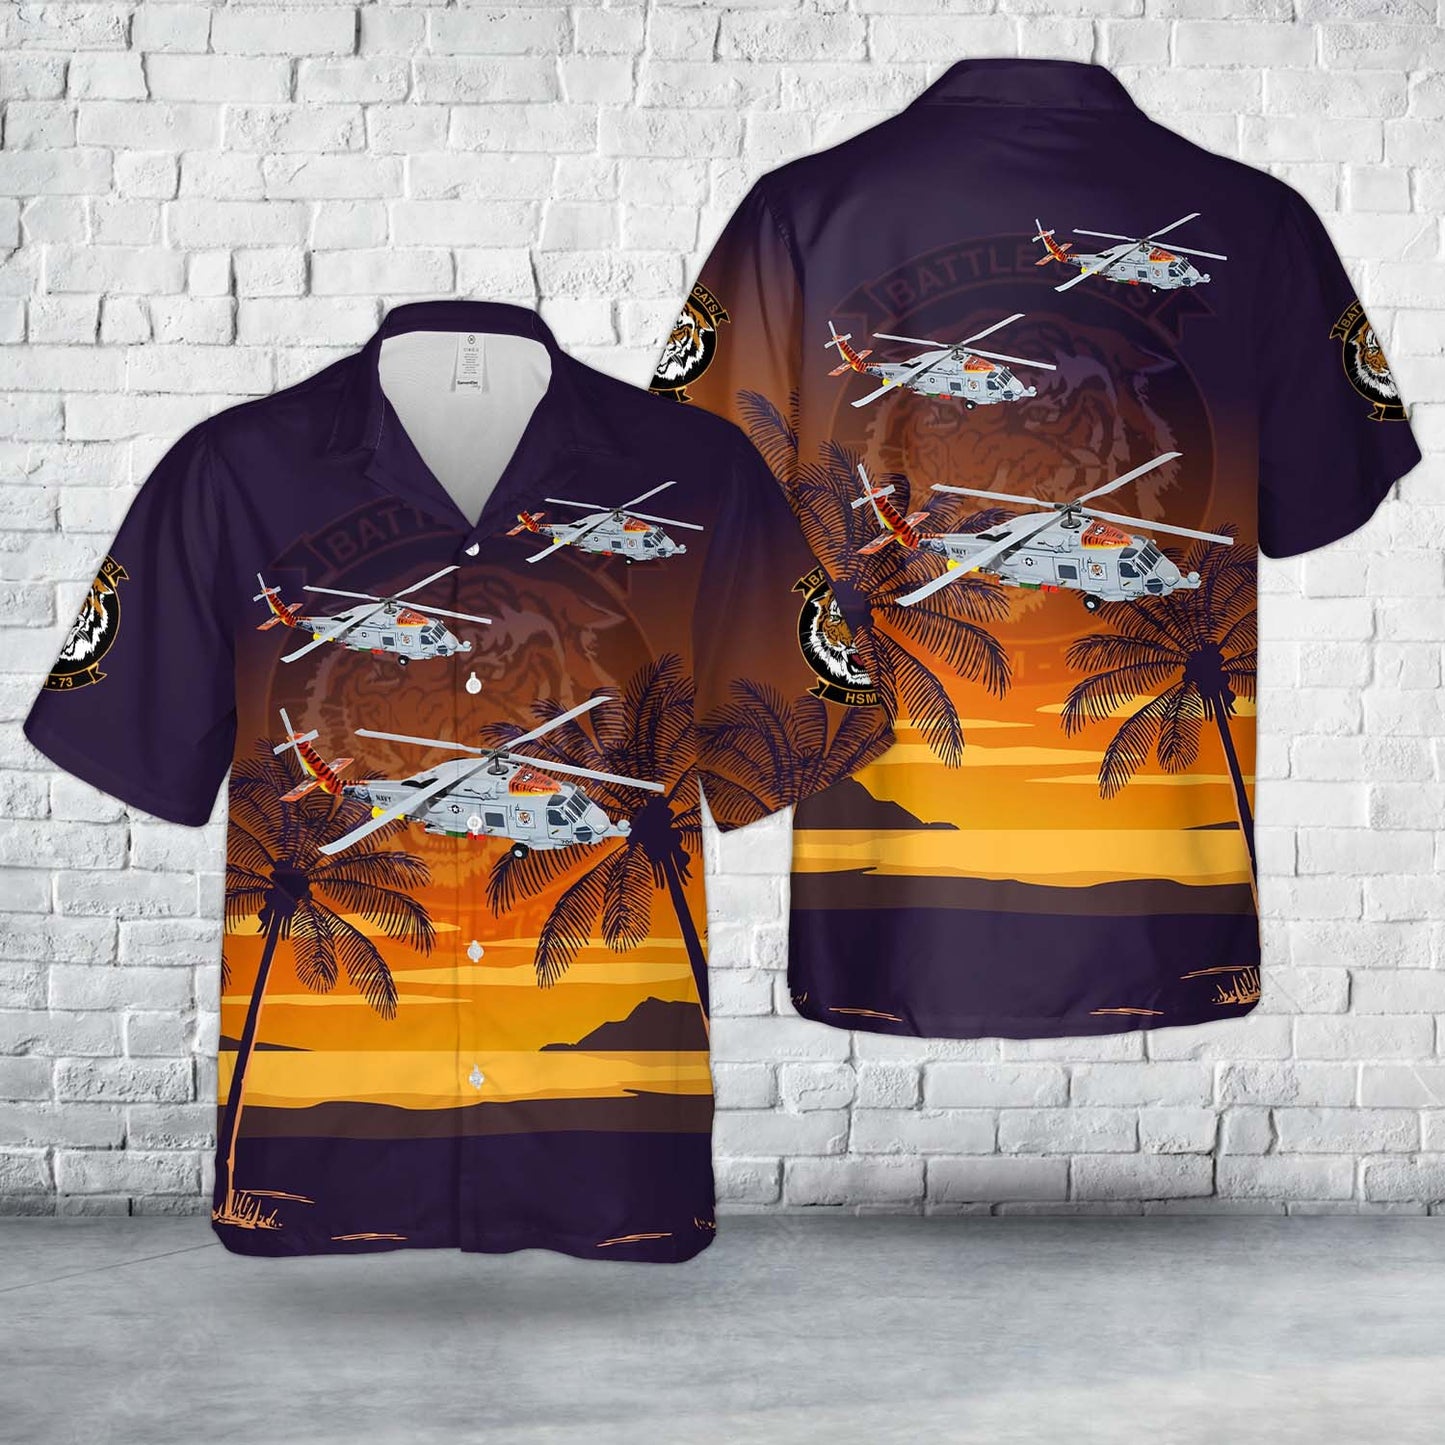 US Navy MH-60R Seahawk Of Helicopter Maritime Strike Squadron 73 (HSM-73) "Battle Cats" Hawaiian Shirt